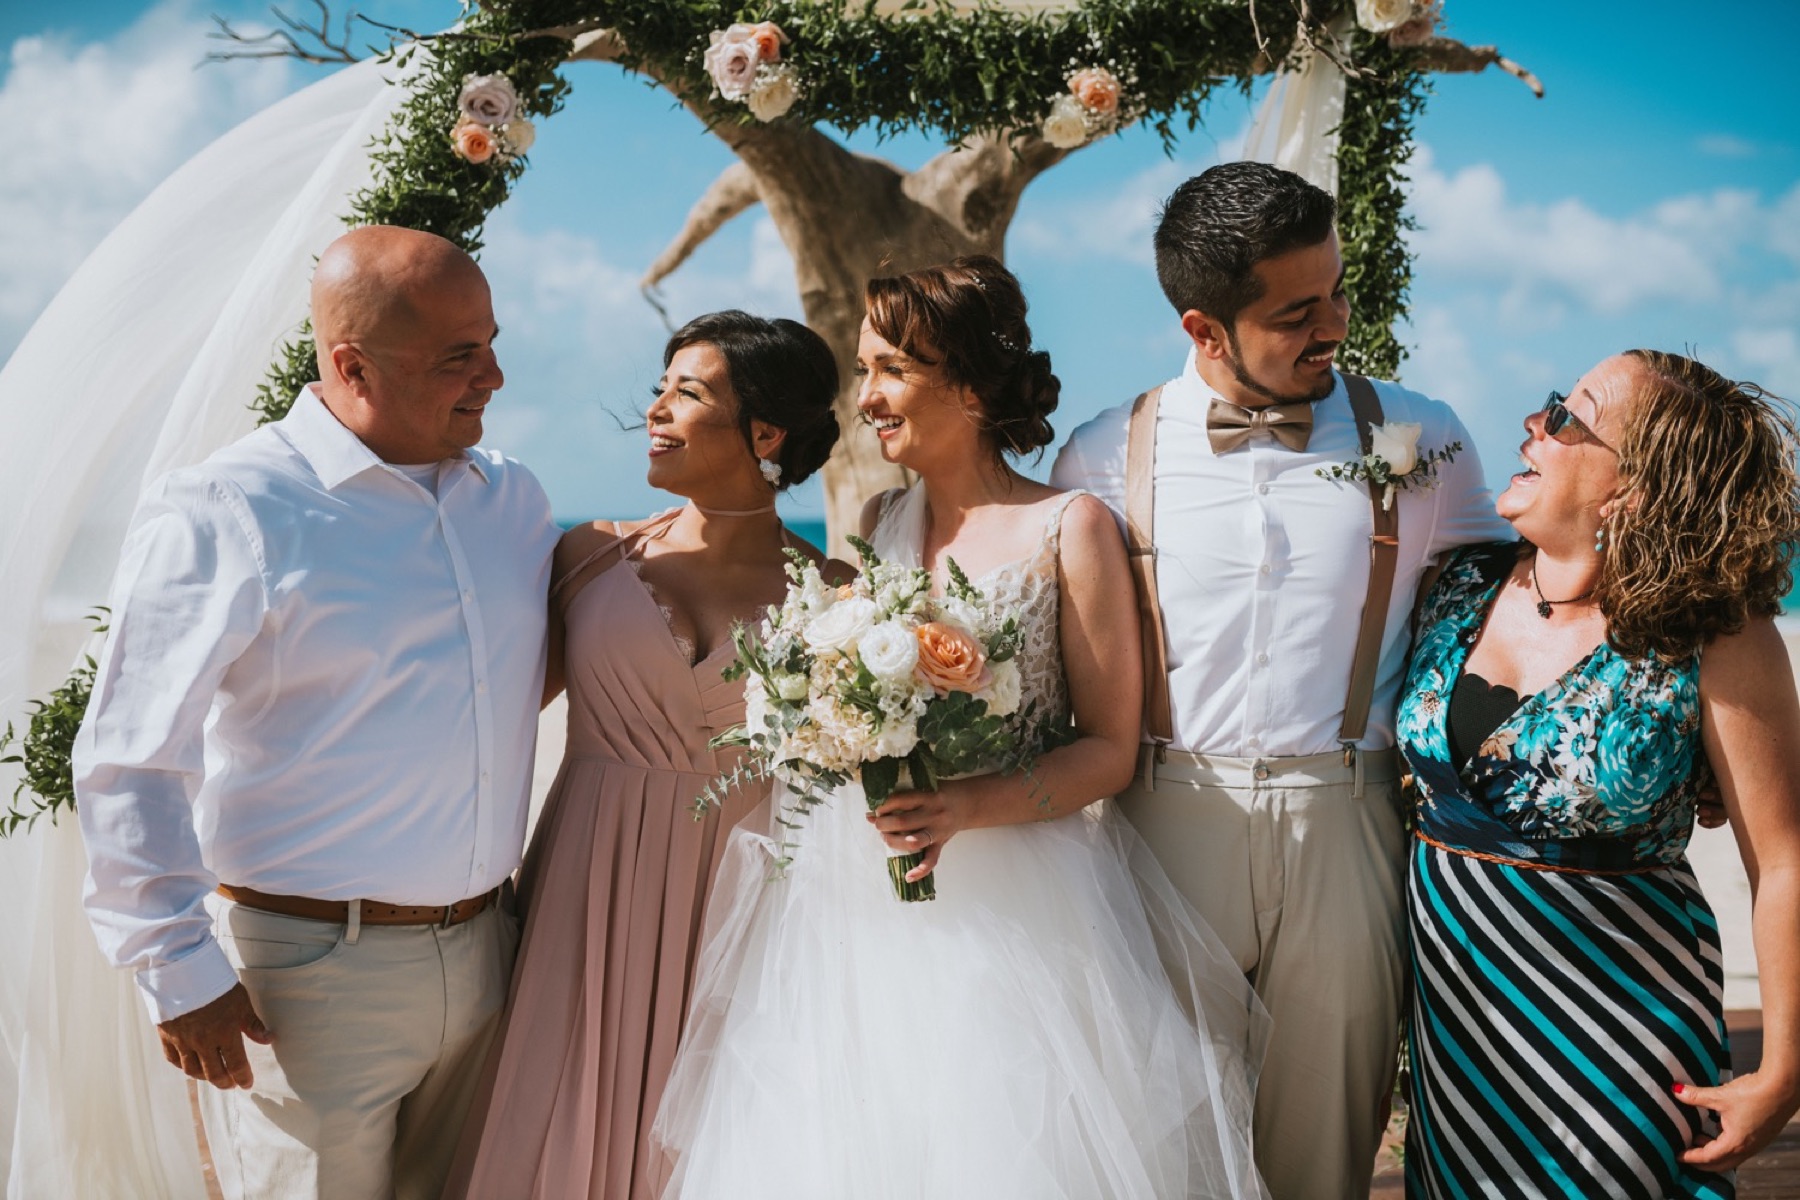 Fun family photo of bride and groom with grooms family